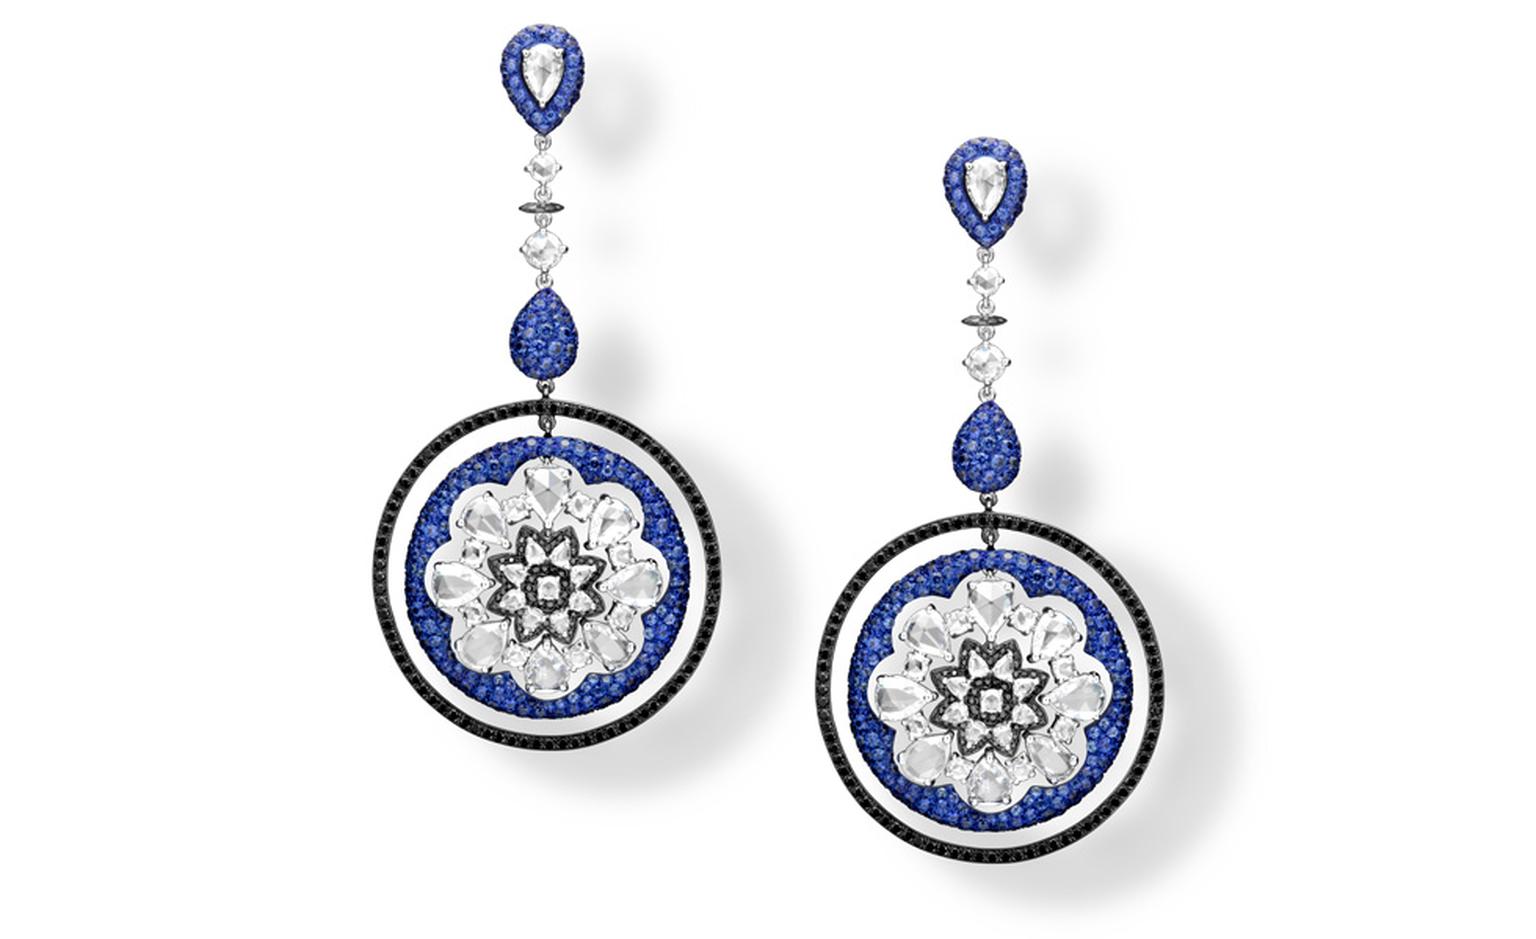 Dream Catcher earrings with sapphires and diamonds by Carnet, designed by Michelle Ong.